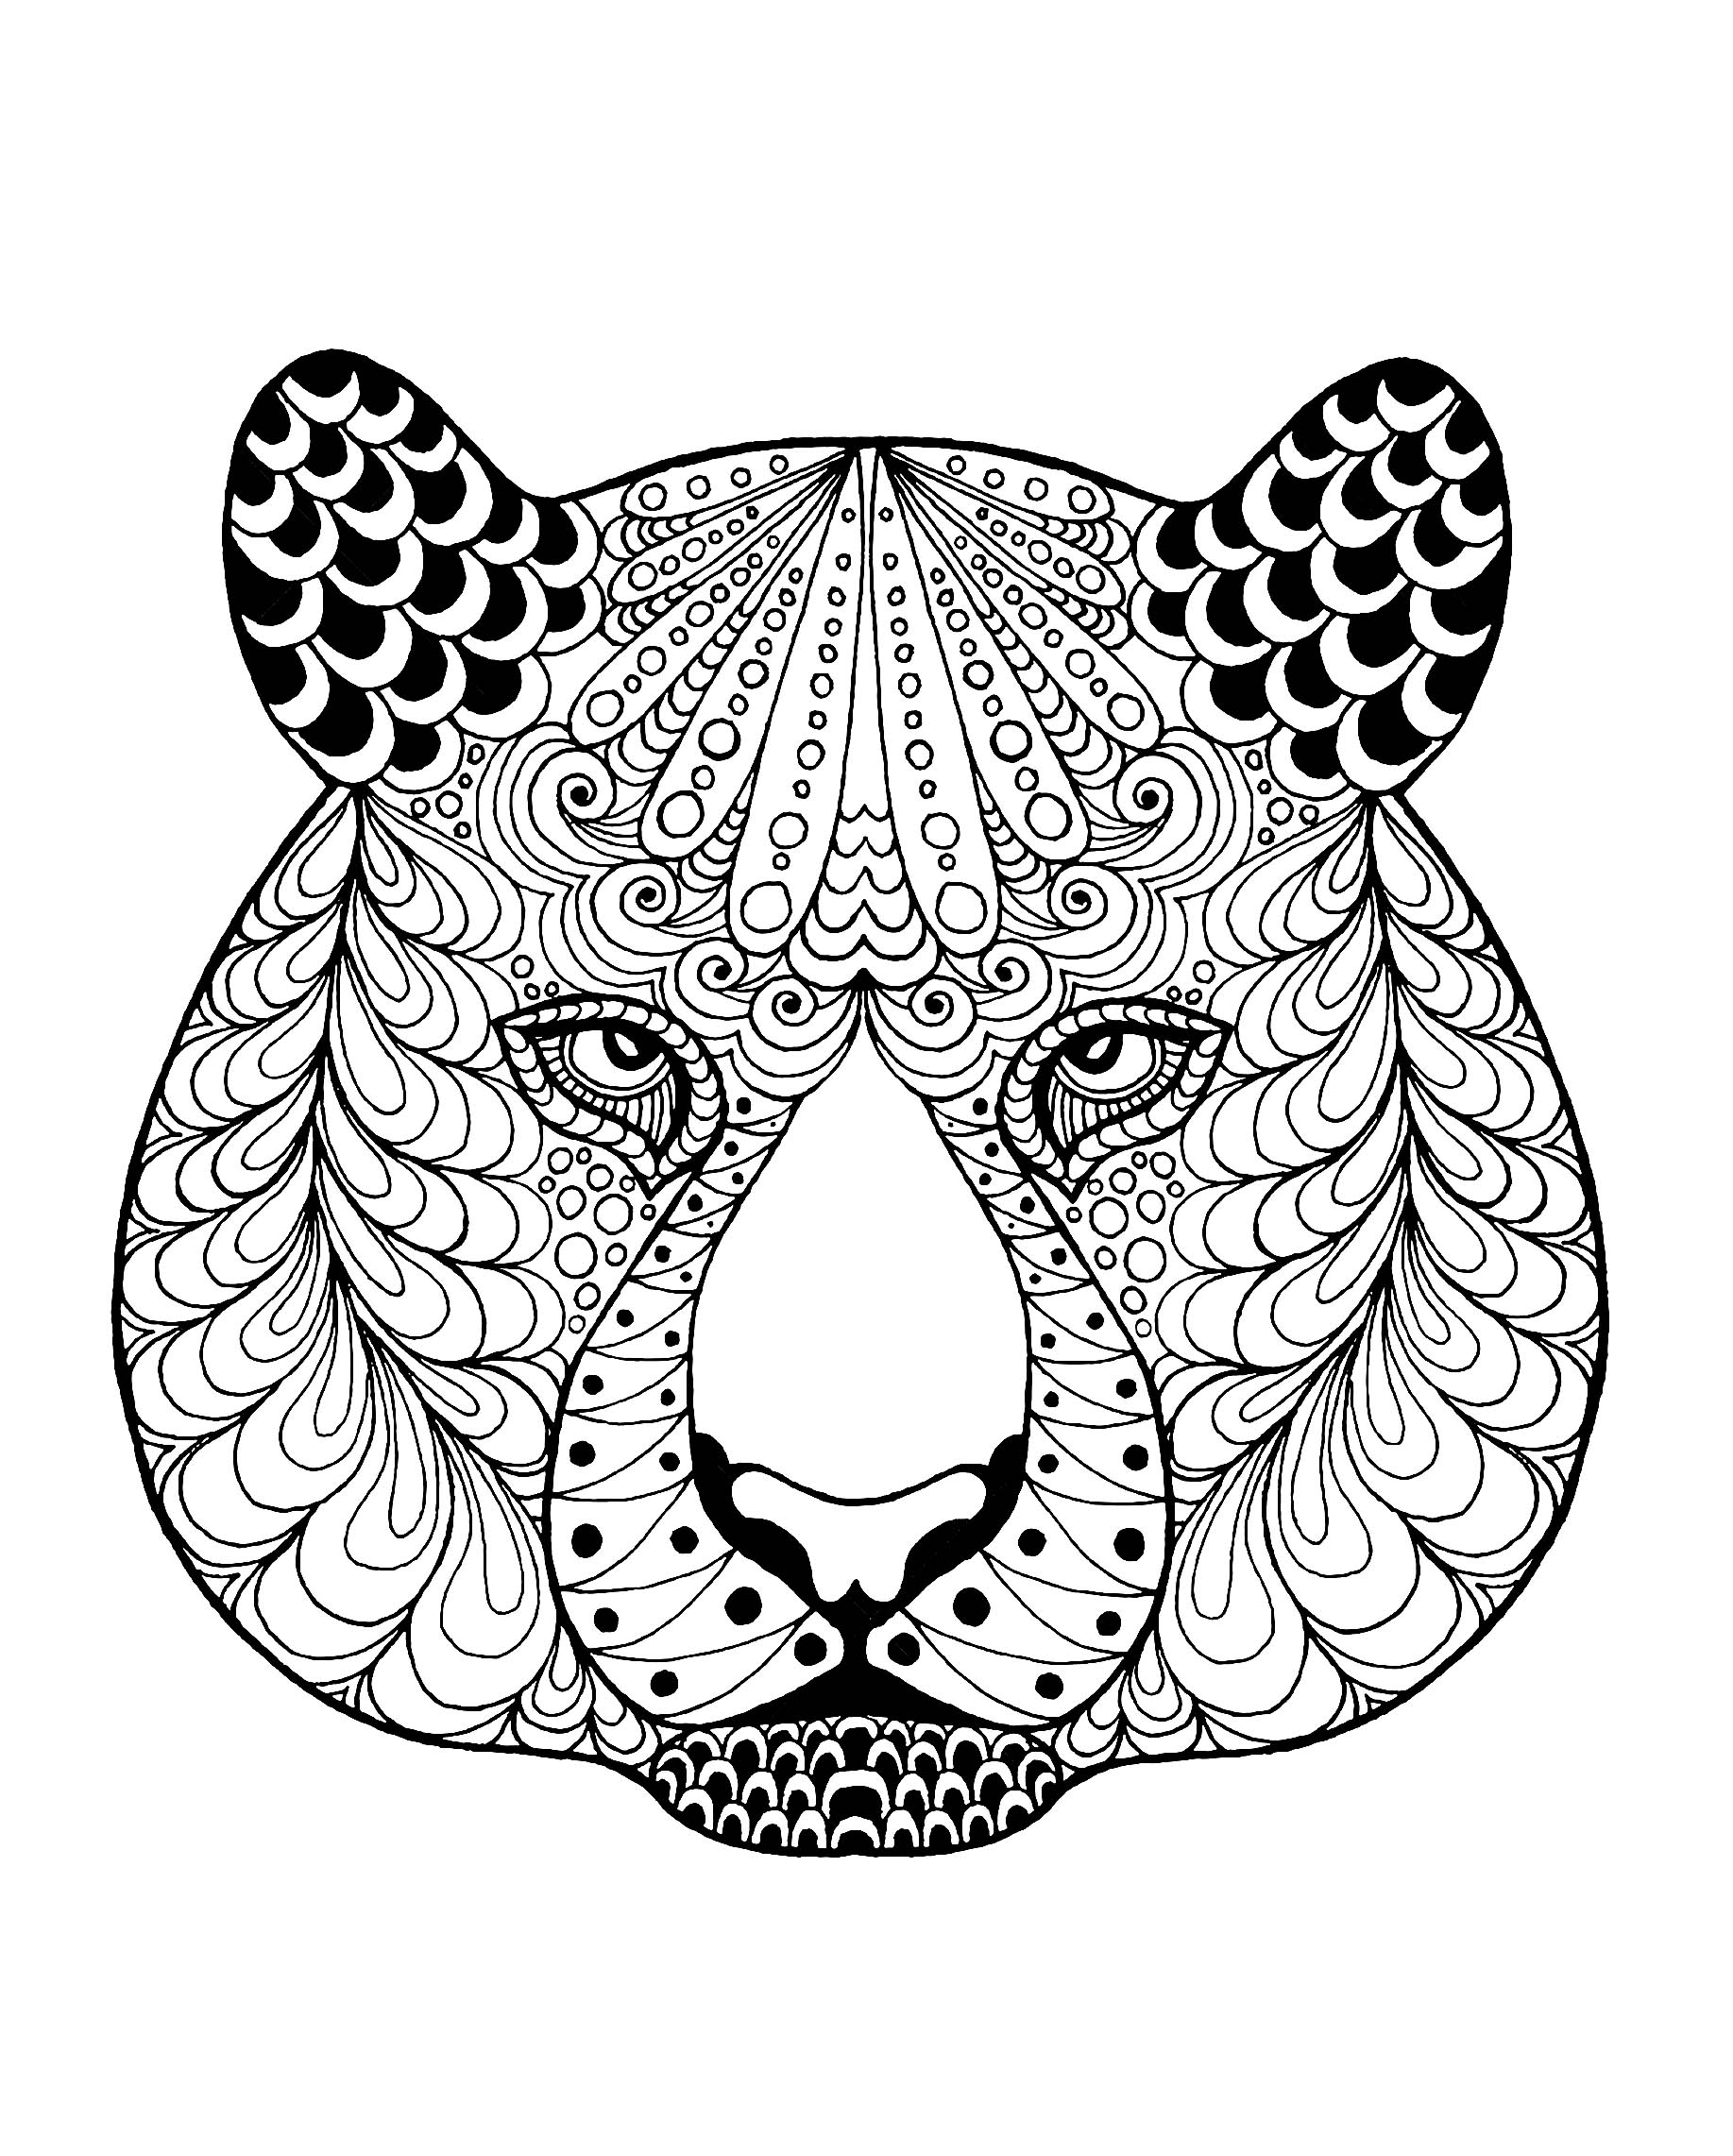 Download Tiger head with patterns - Tigers Adult Coloring Pages